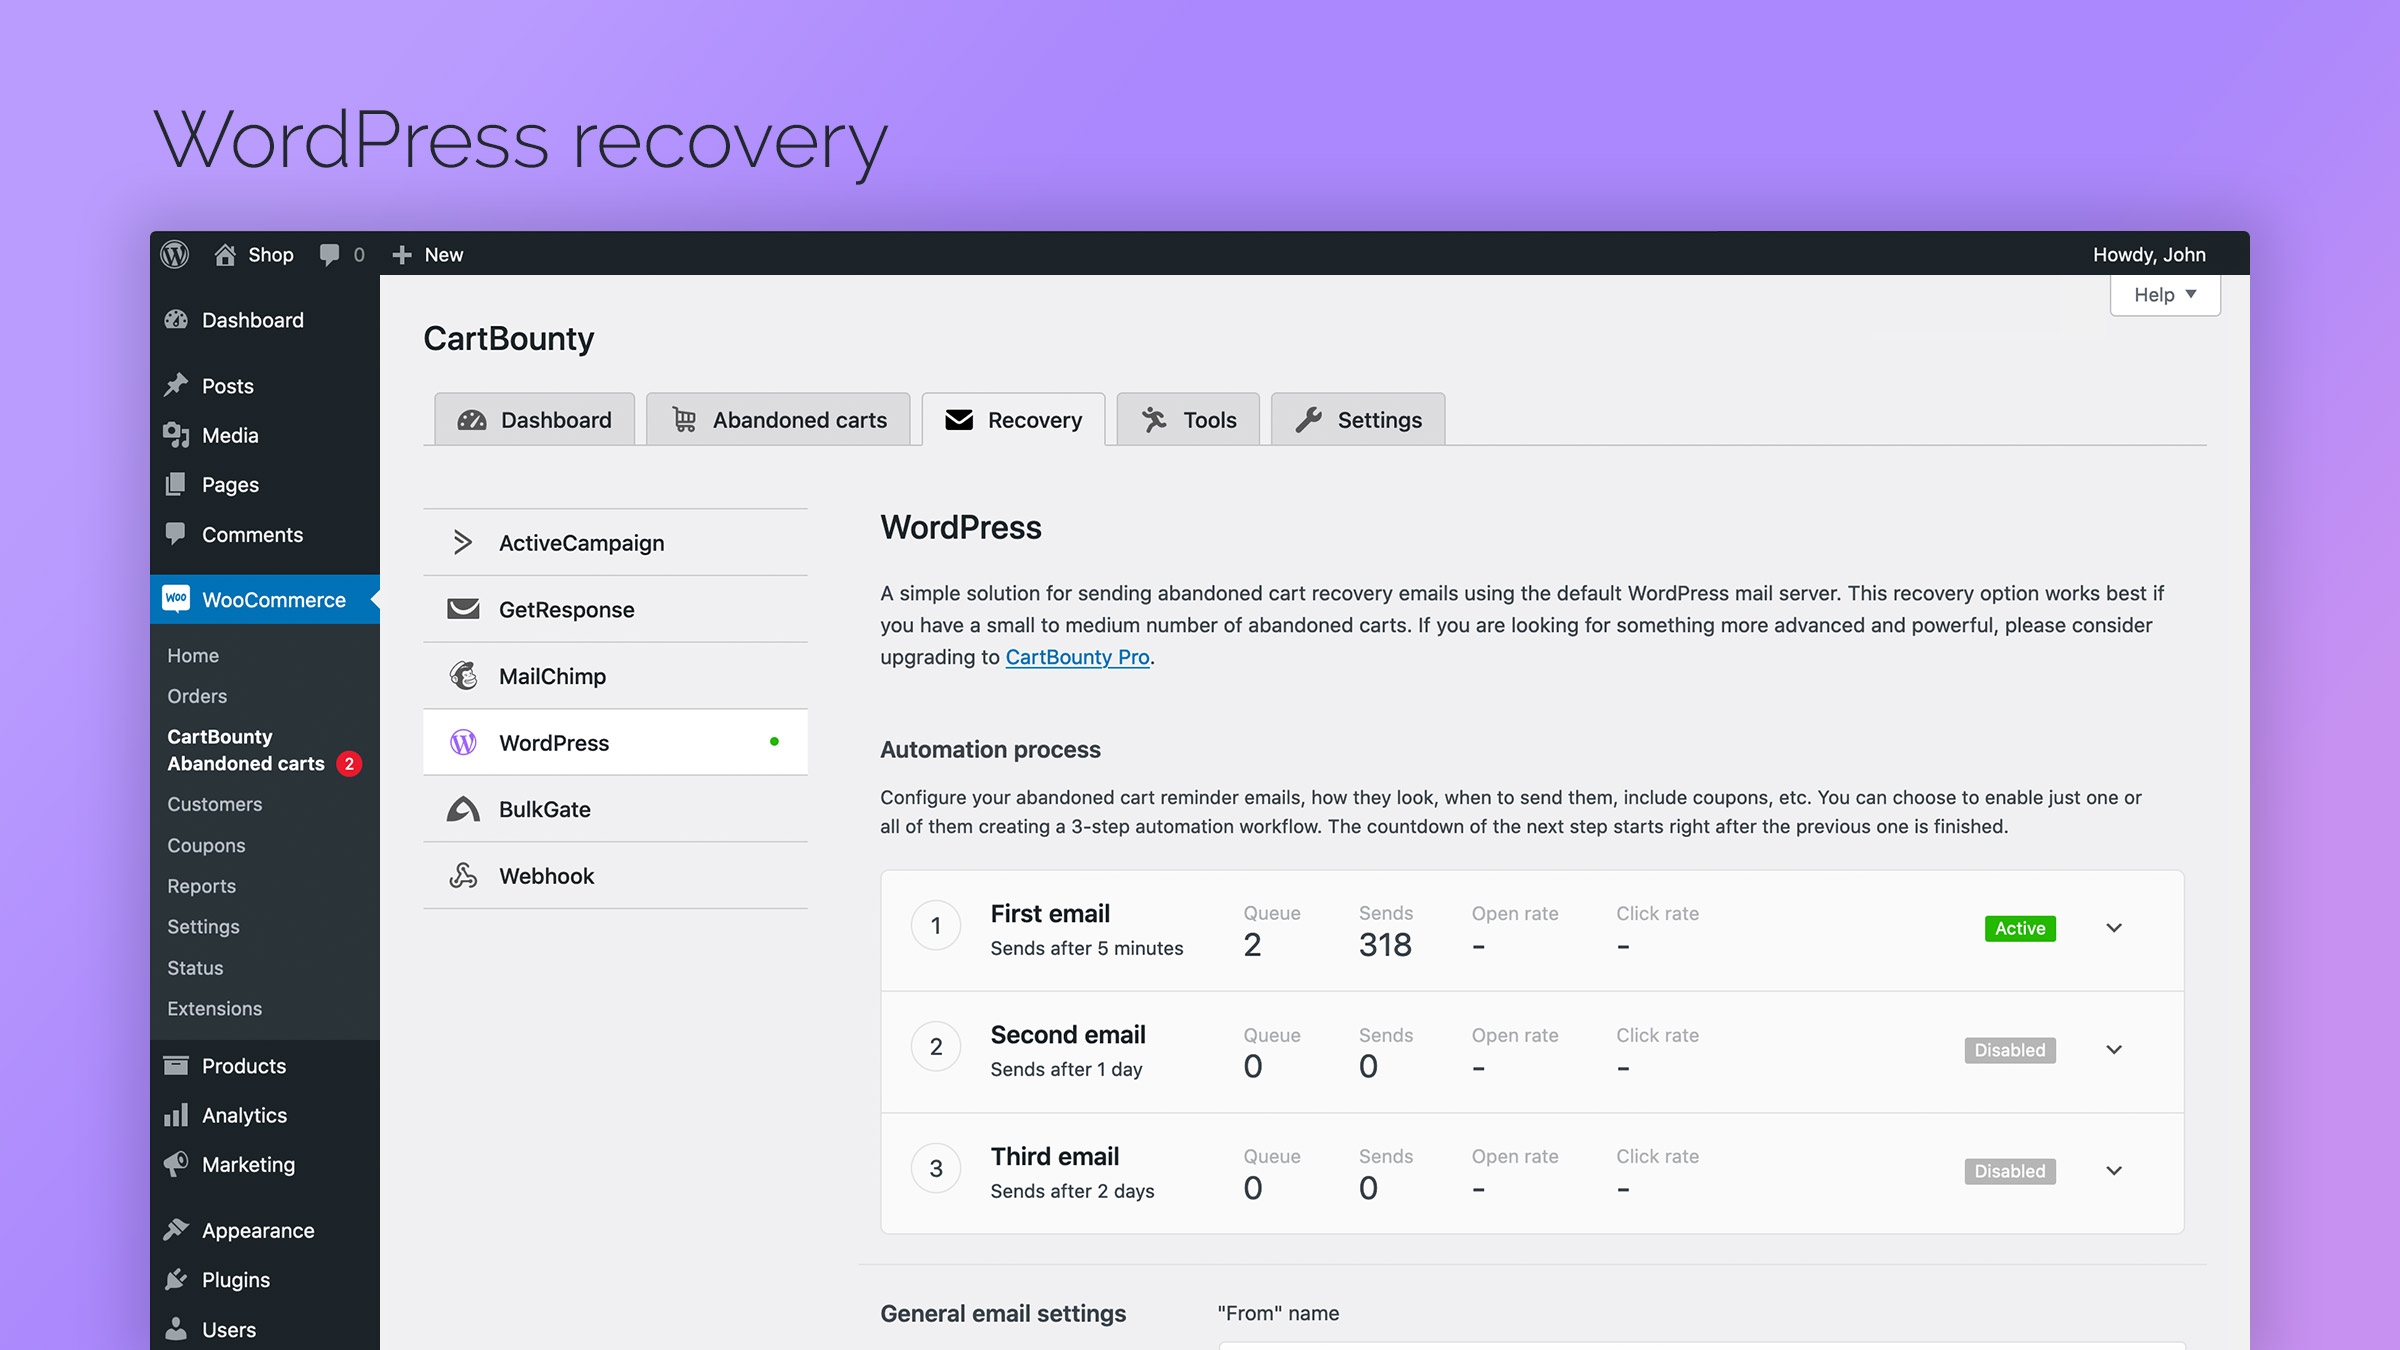 WordPress recovery email settings